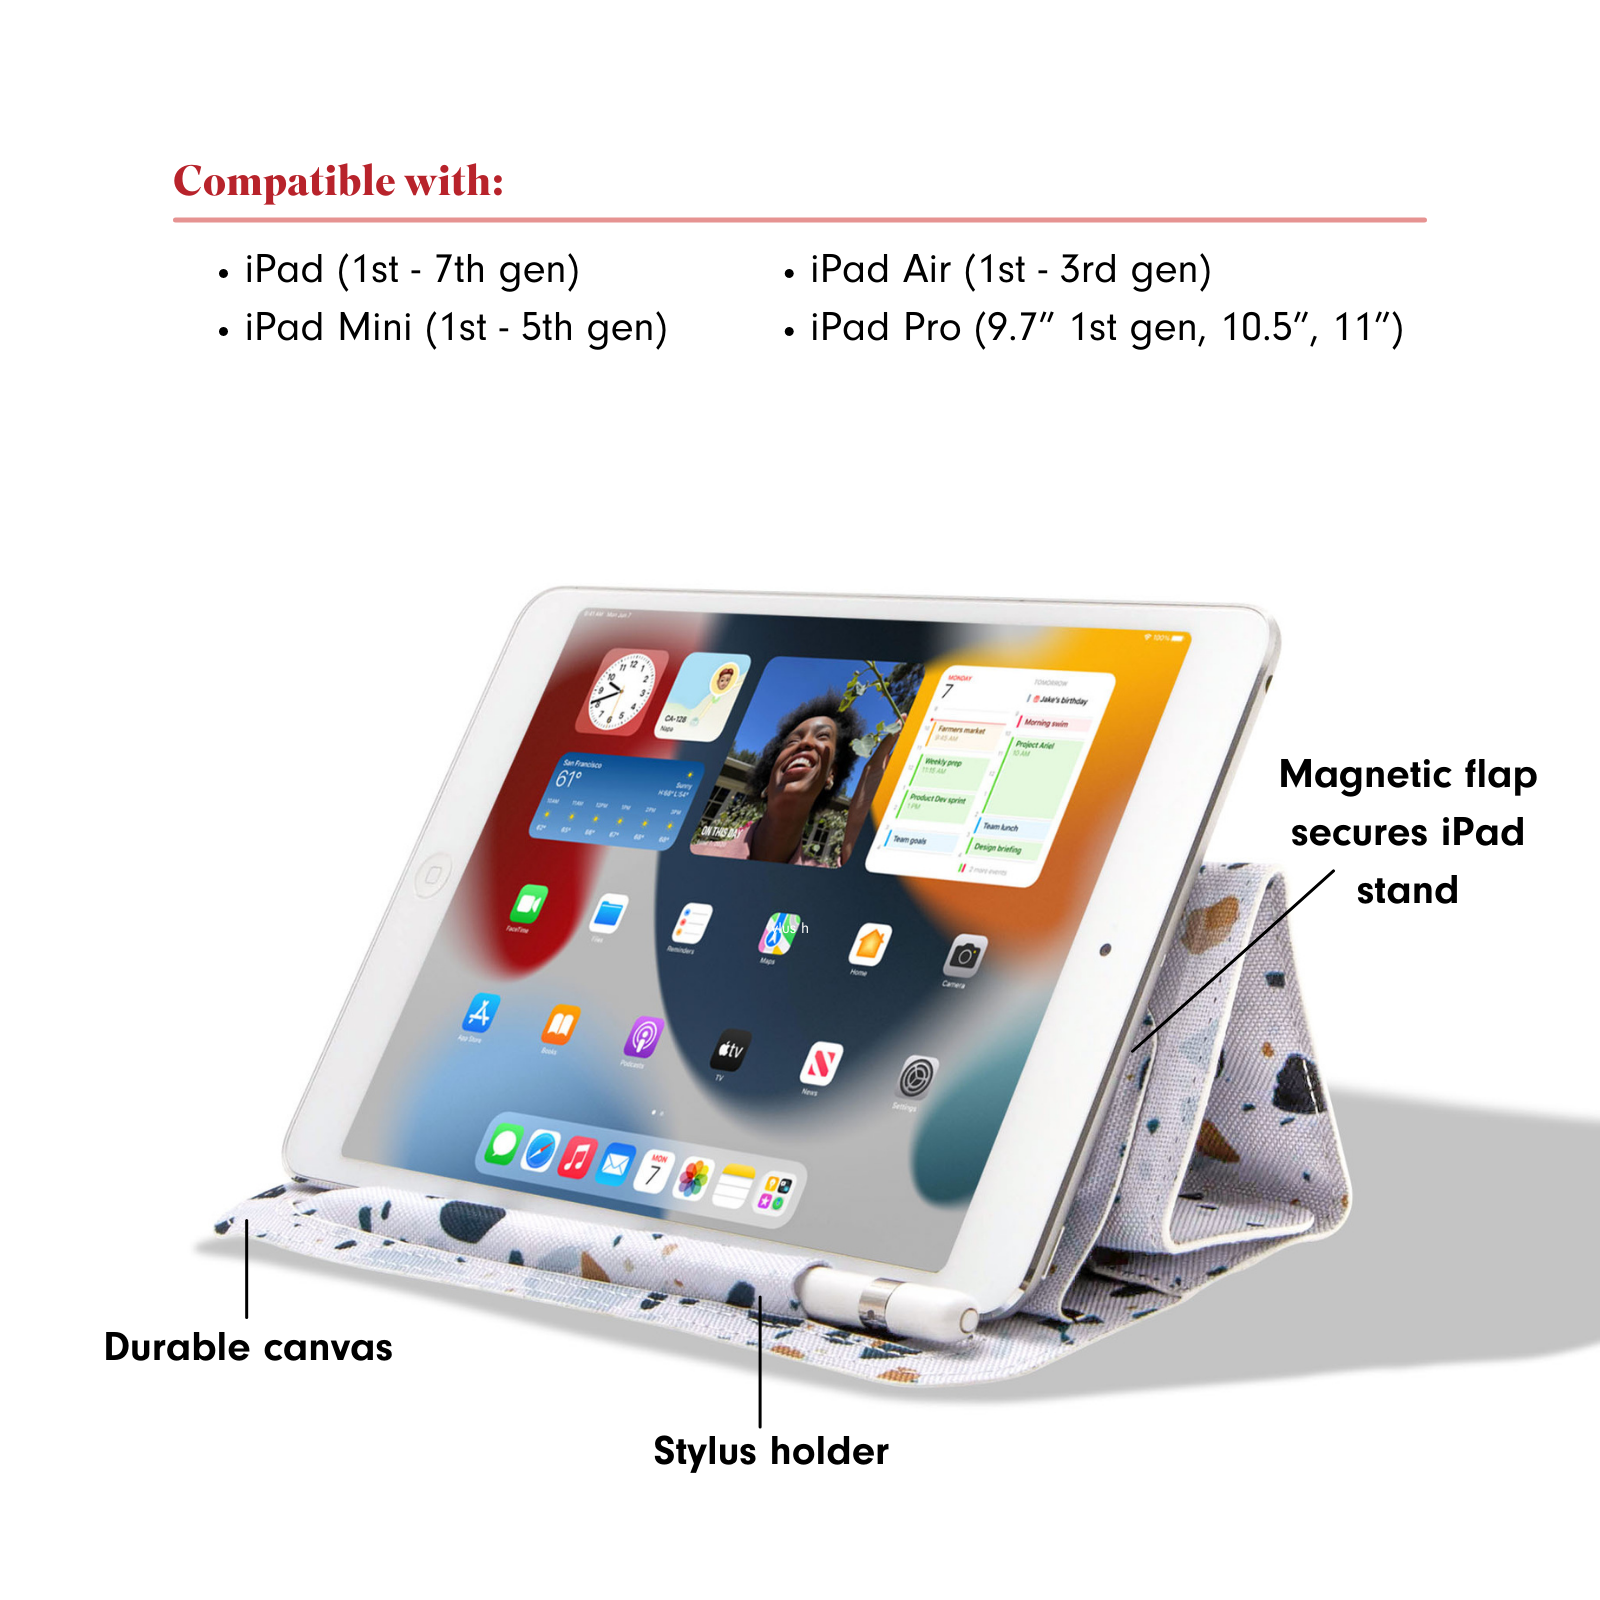 Description of folded up iPad sleeve calling out durable canvas material, magnetic flap secures iPad stand, and showing the stylus holder location.